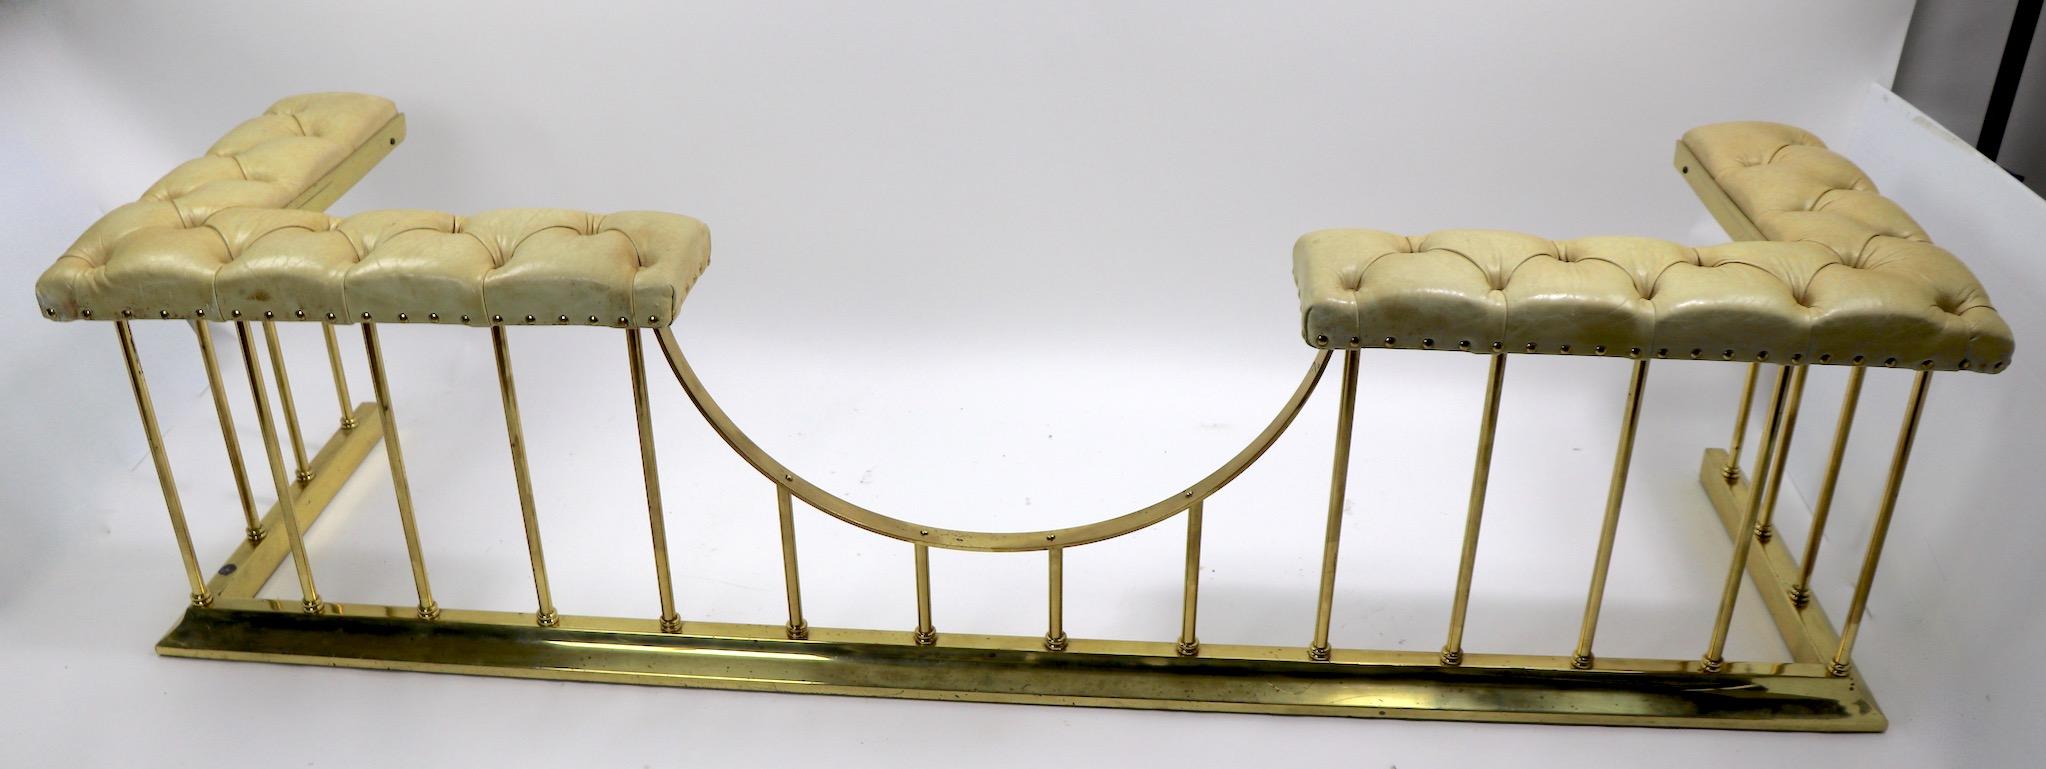 Large Scale Bench Club Fender in Brass and Leather 6